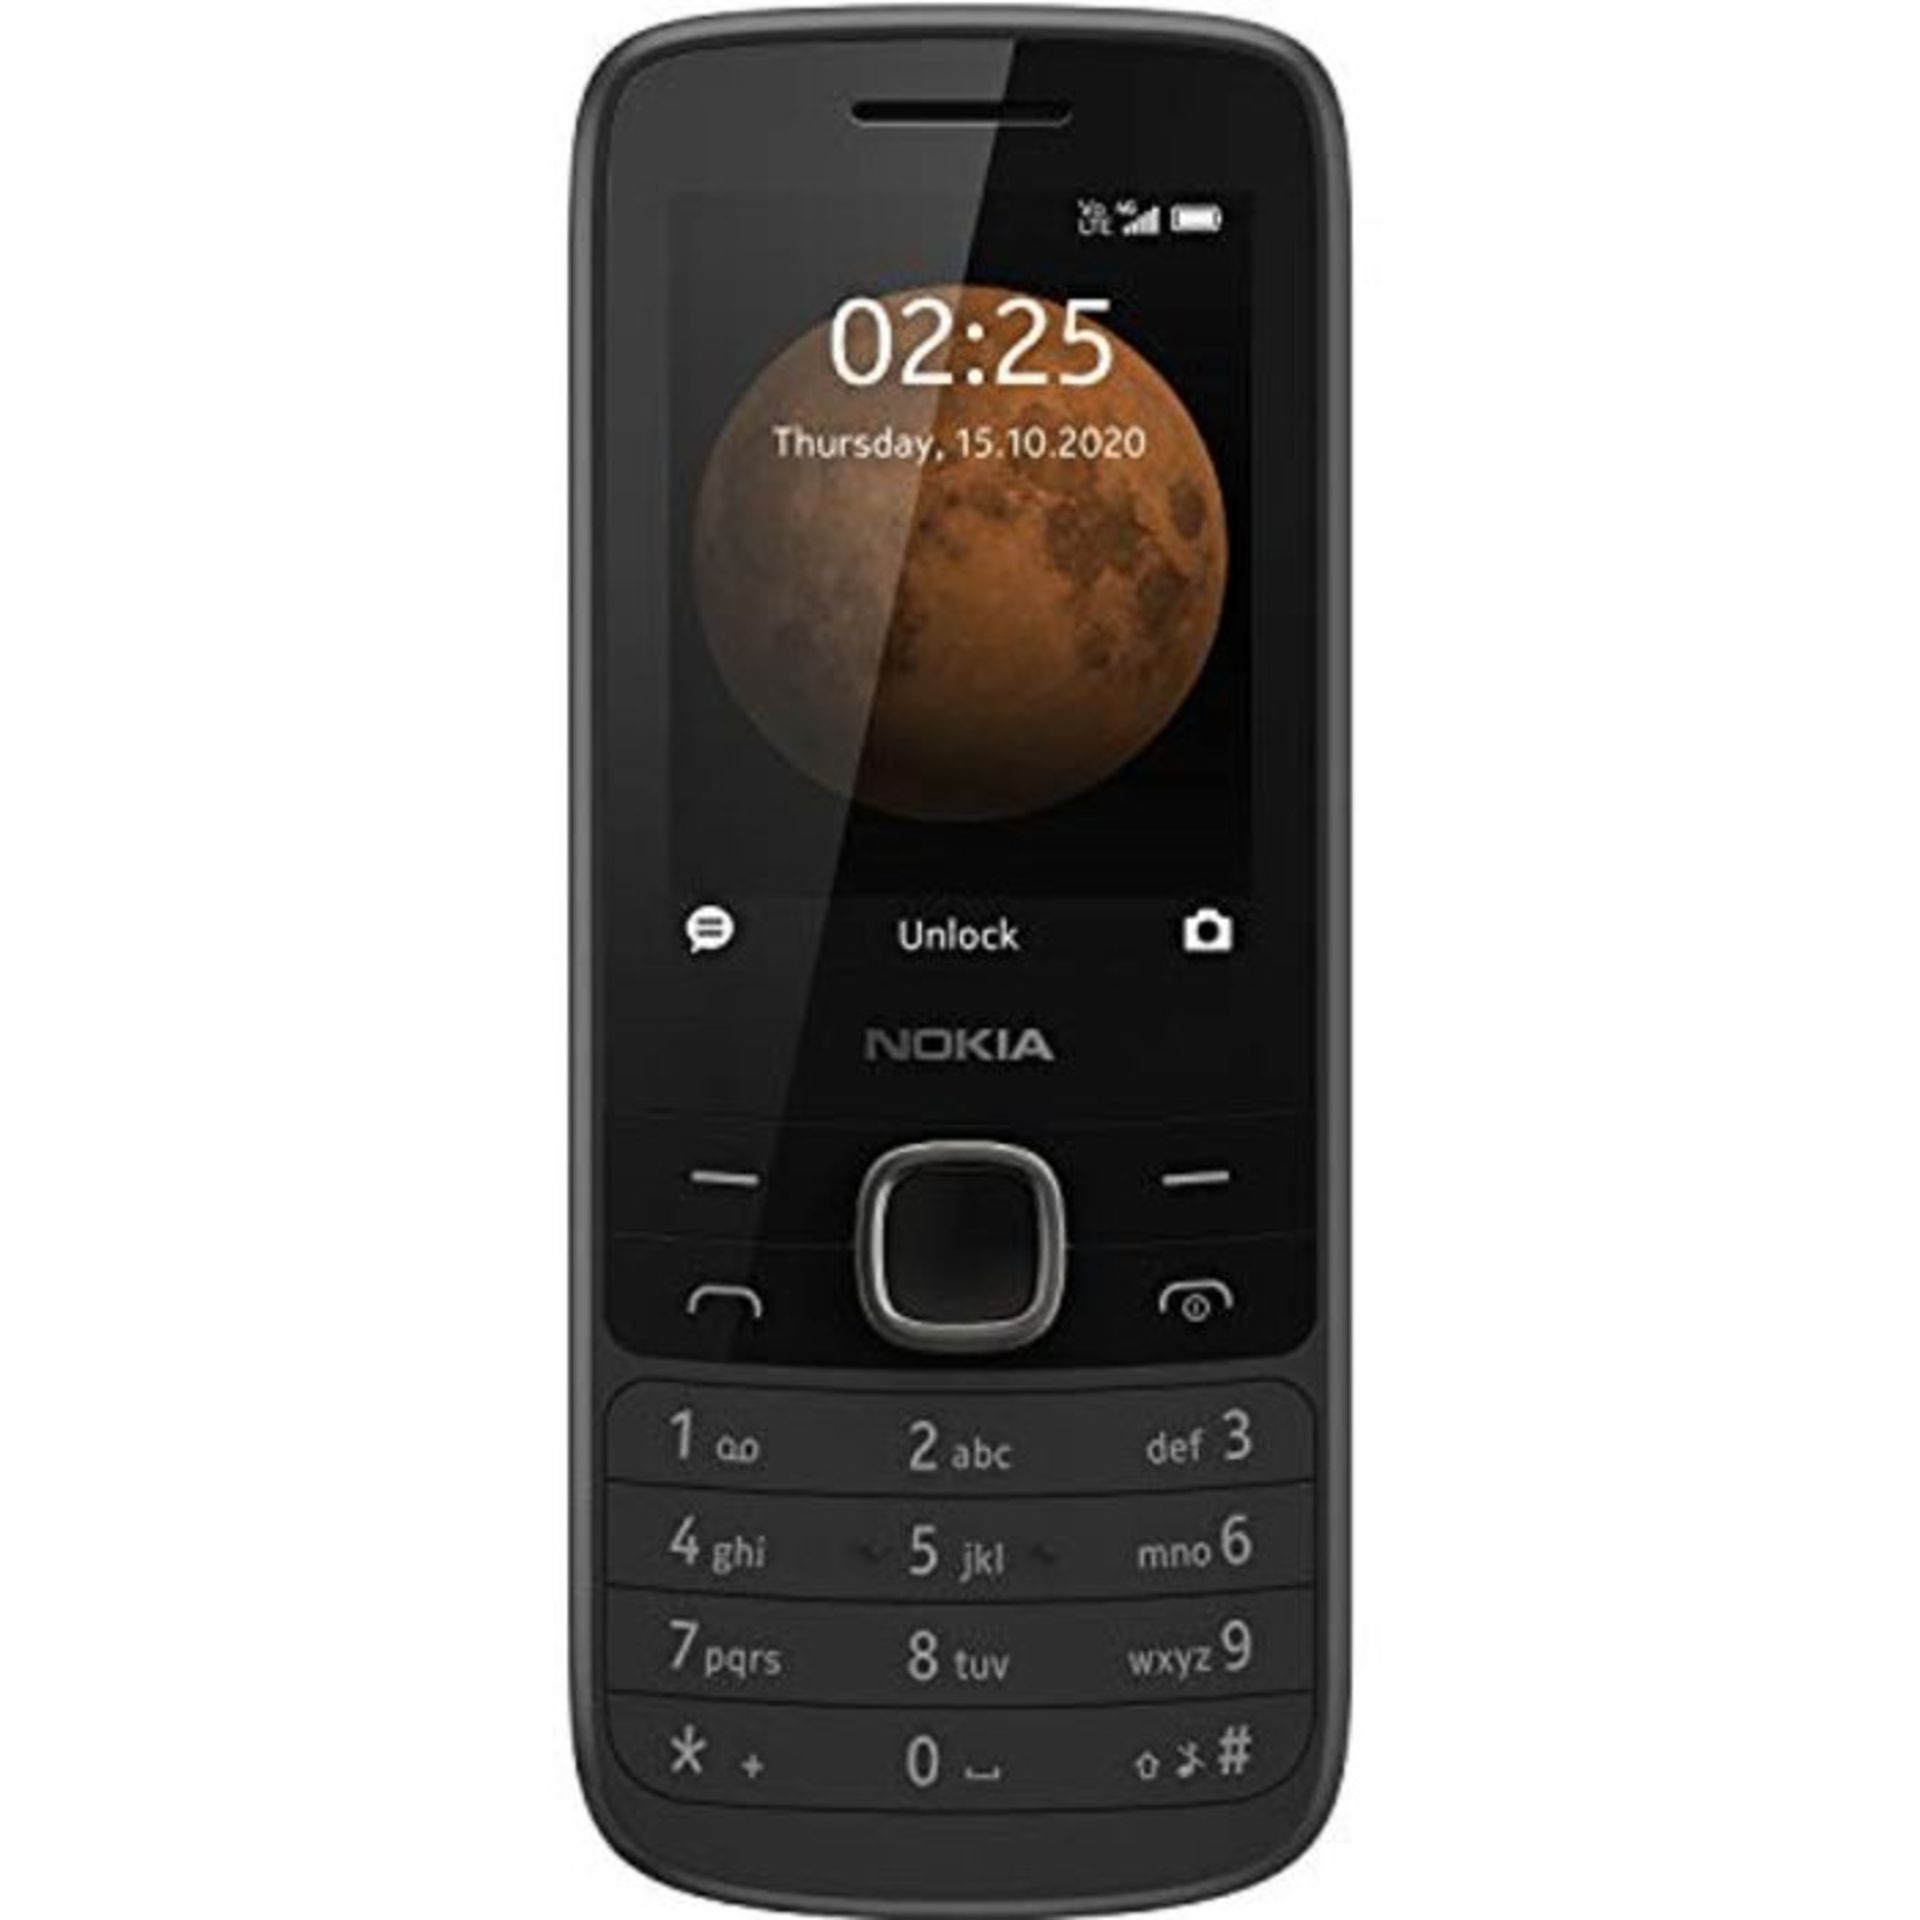 Nokia 225 4G all carriers, 0.06gb, 2.4-Inch UK SIM-Free Feature Phone (Dual SIM)  B